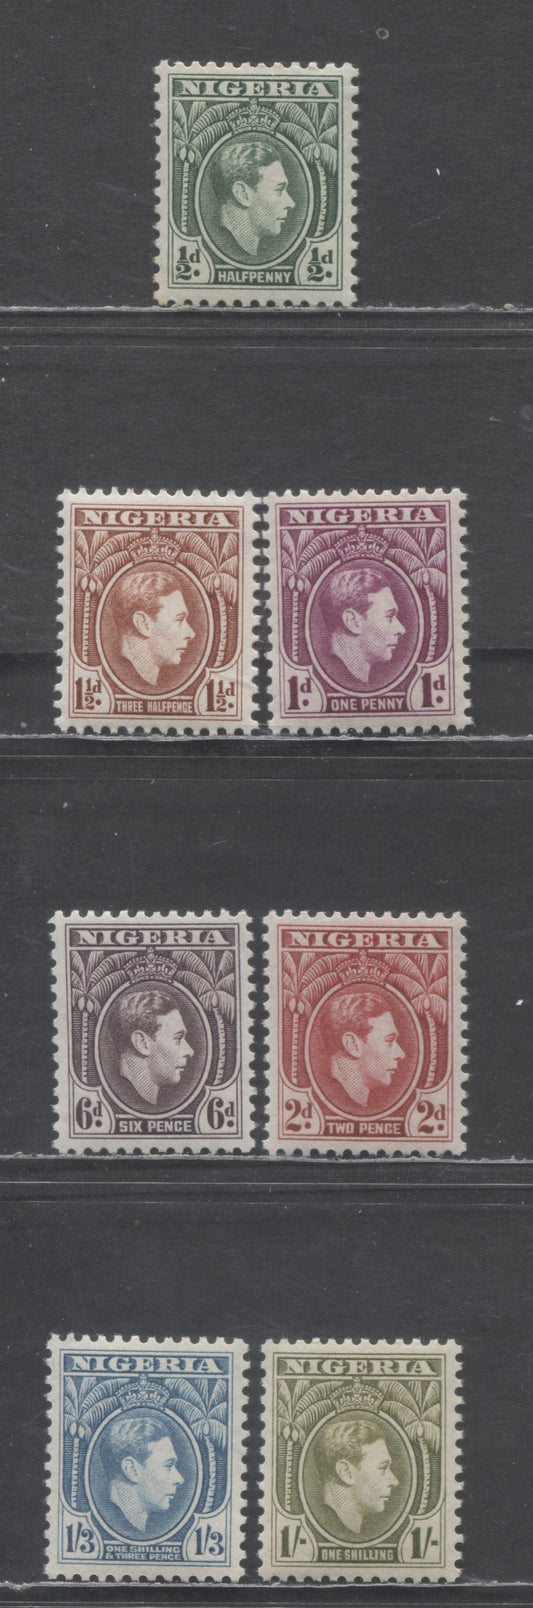 Nigeria SC#53a/66a 1950-1952 King George VI Palm Tree Definitives, Comb Perf 11.5 , 7 VFNH Singles, Click on Listing to See ALL Pictures, 2022 Scott Classic Cat. $7